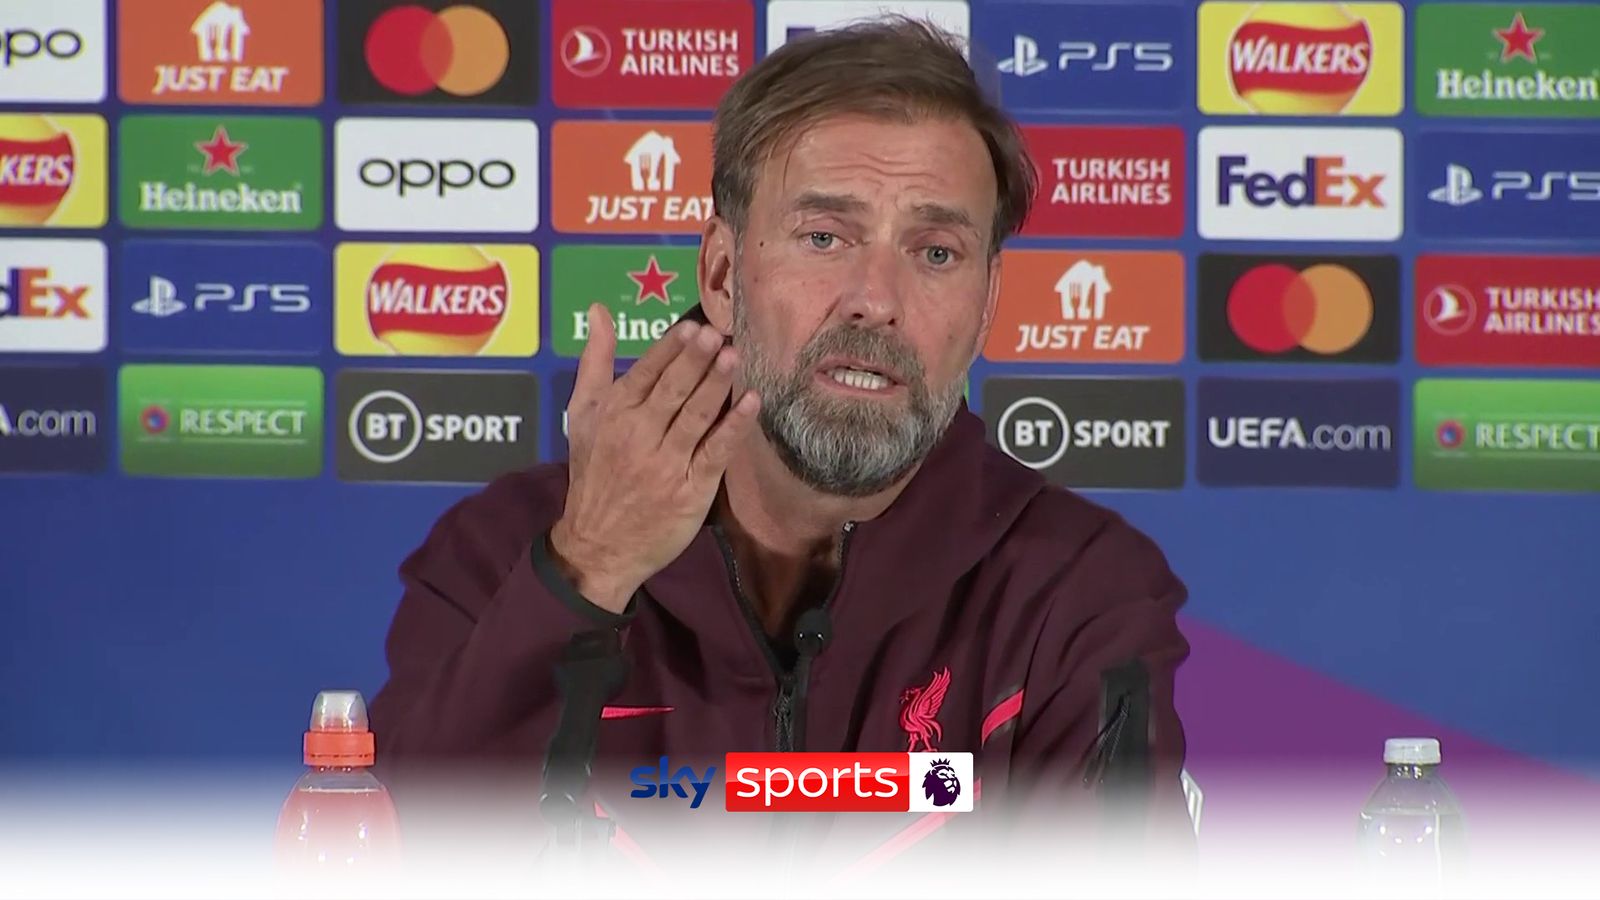 liverpool-manager-jurgen-klopp-says-injuries-and-bad-luck-have-contributed-to-inconsistent-start-to-season